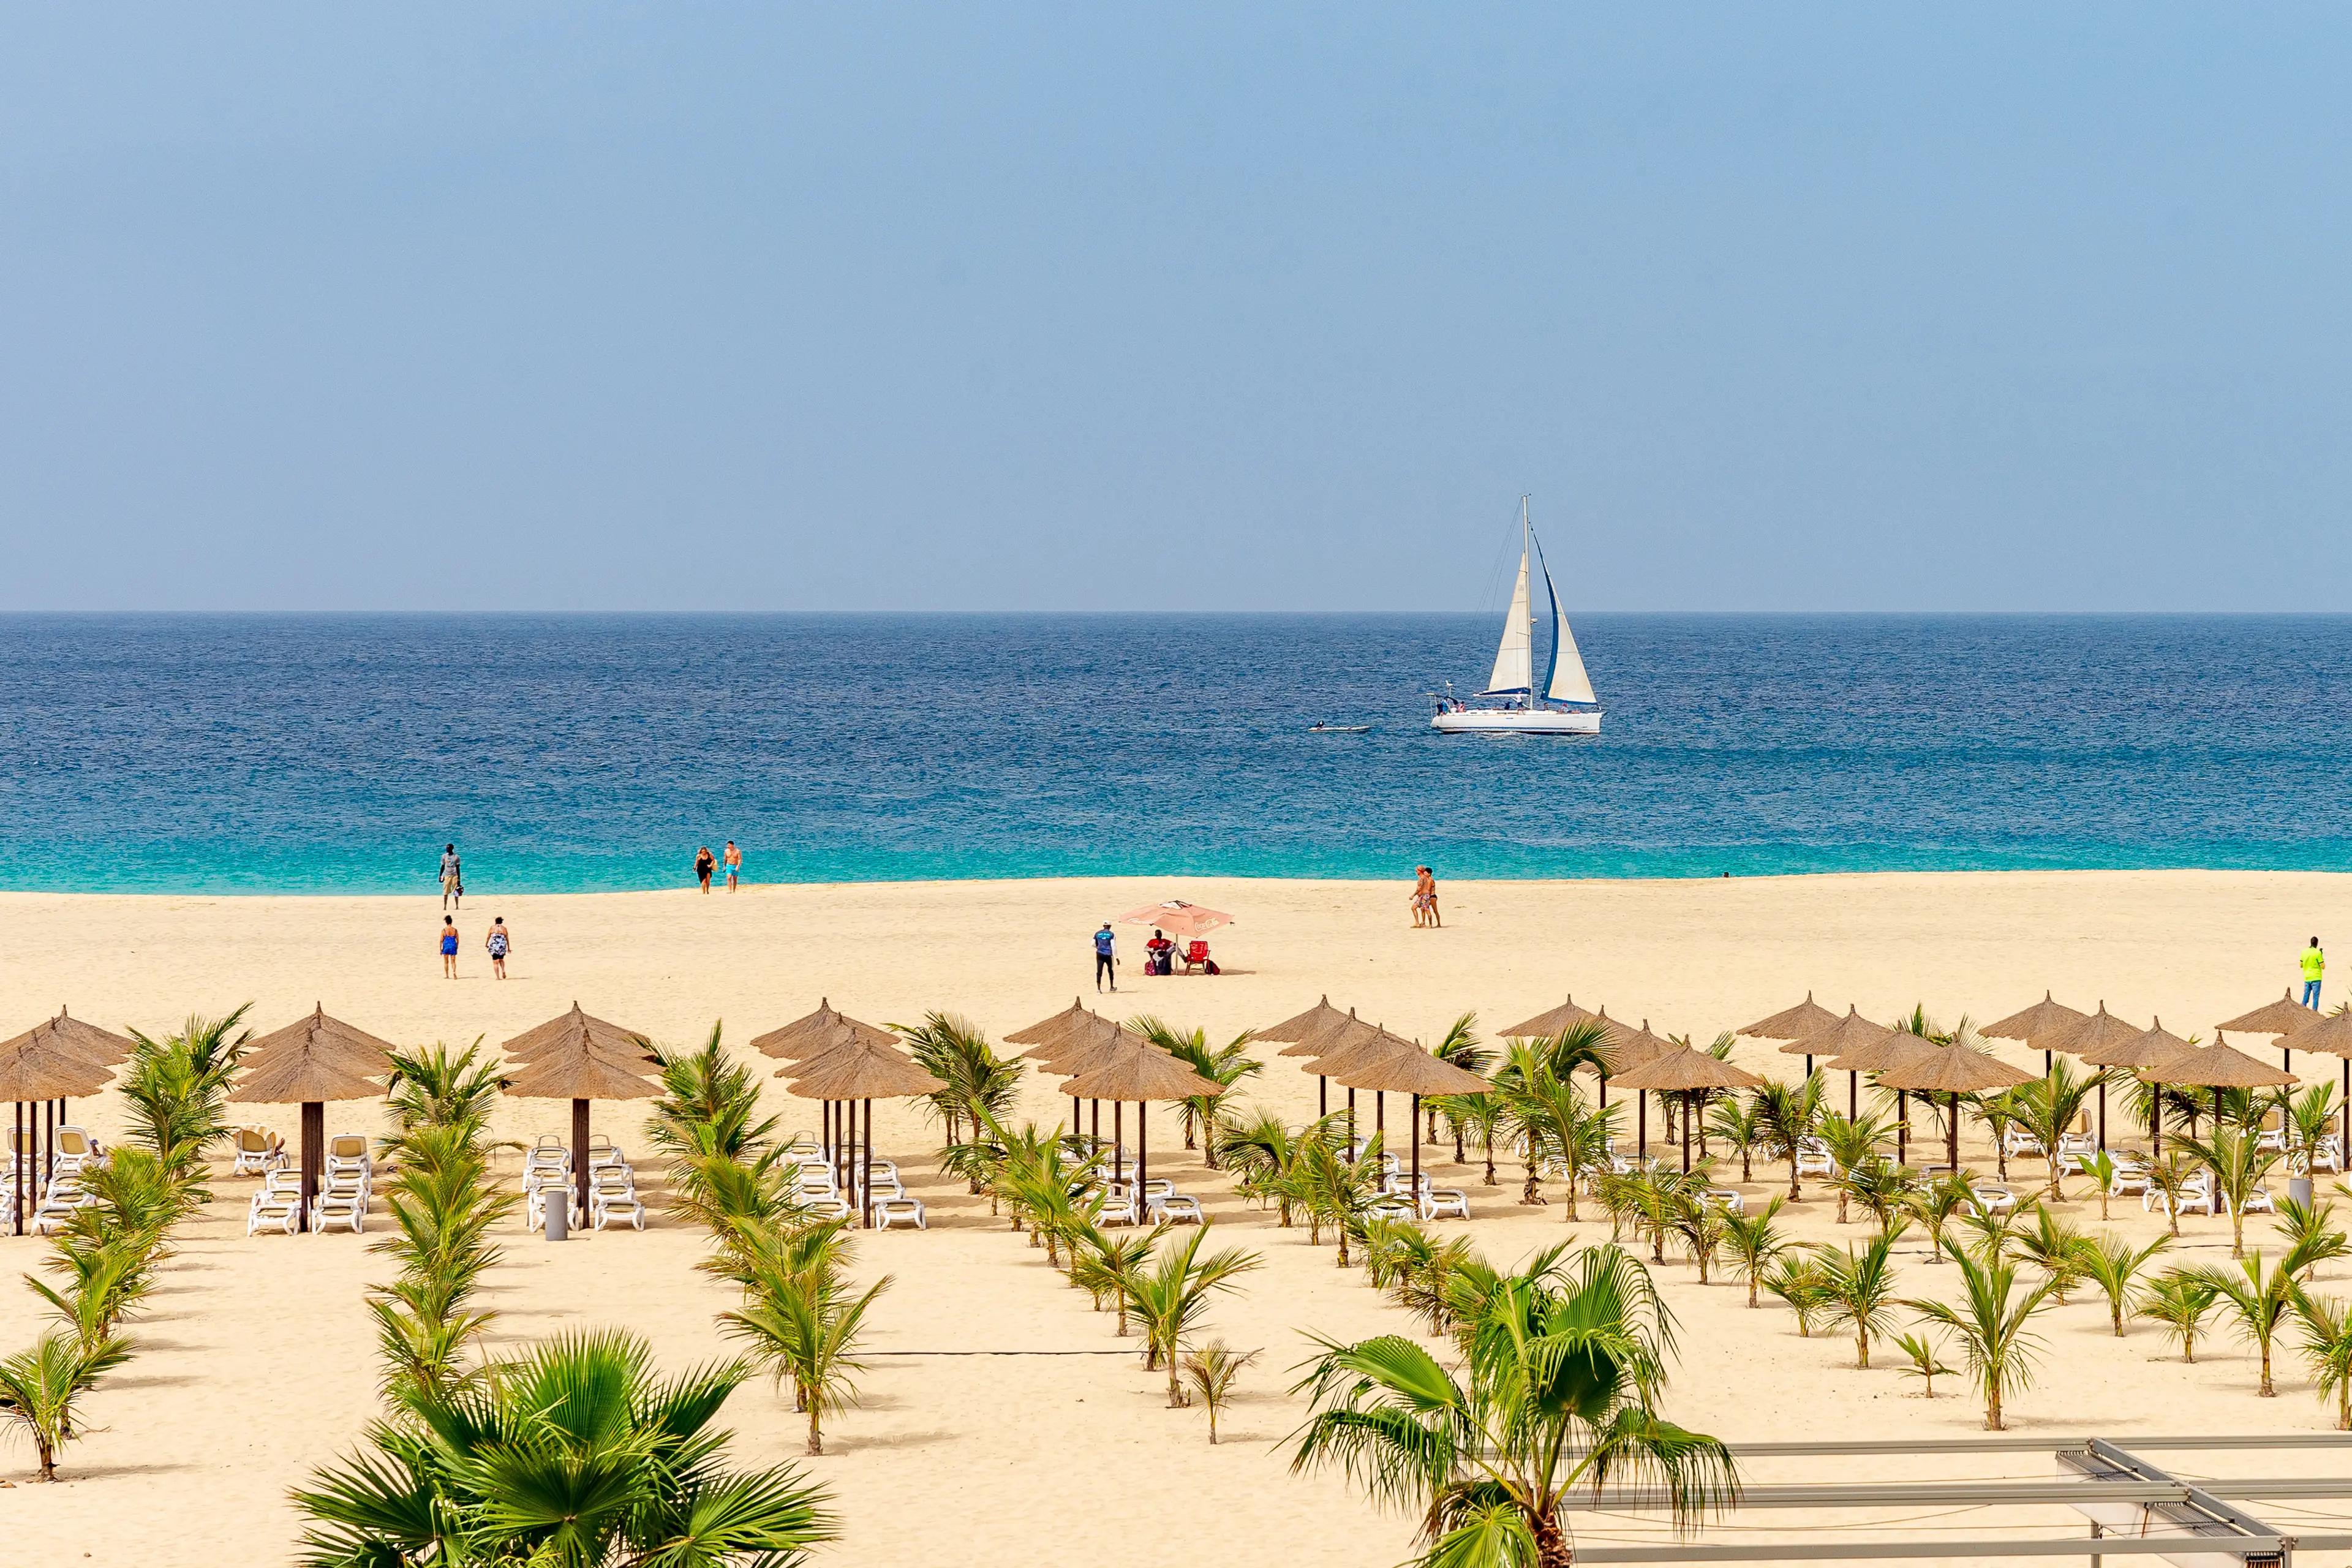 5-Day Local Cuisine, Wine, and Nightlife Journey with Friends in Cape Verde